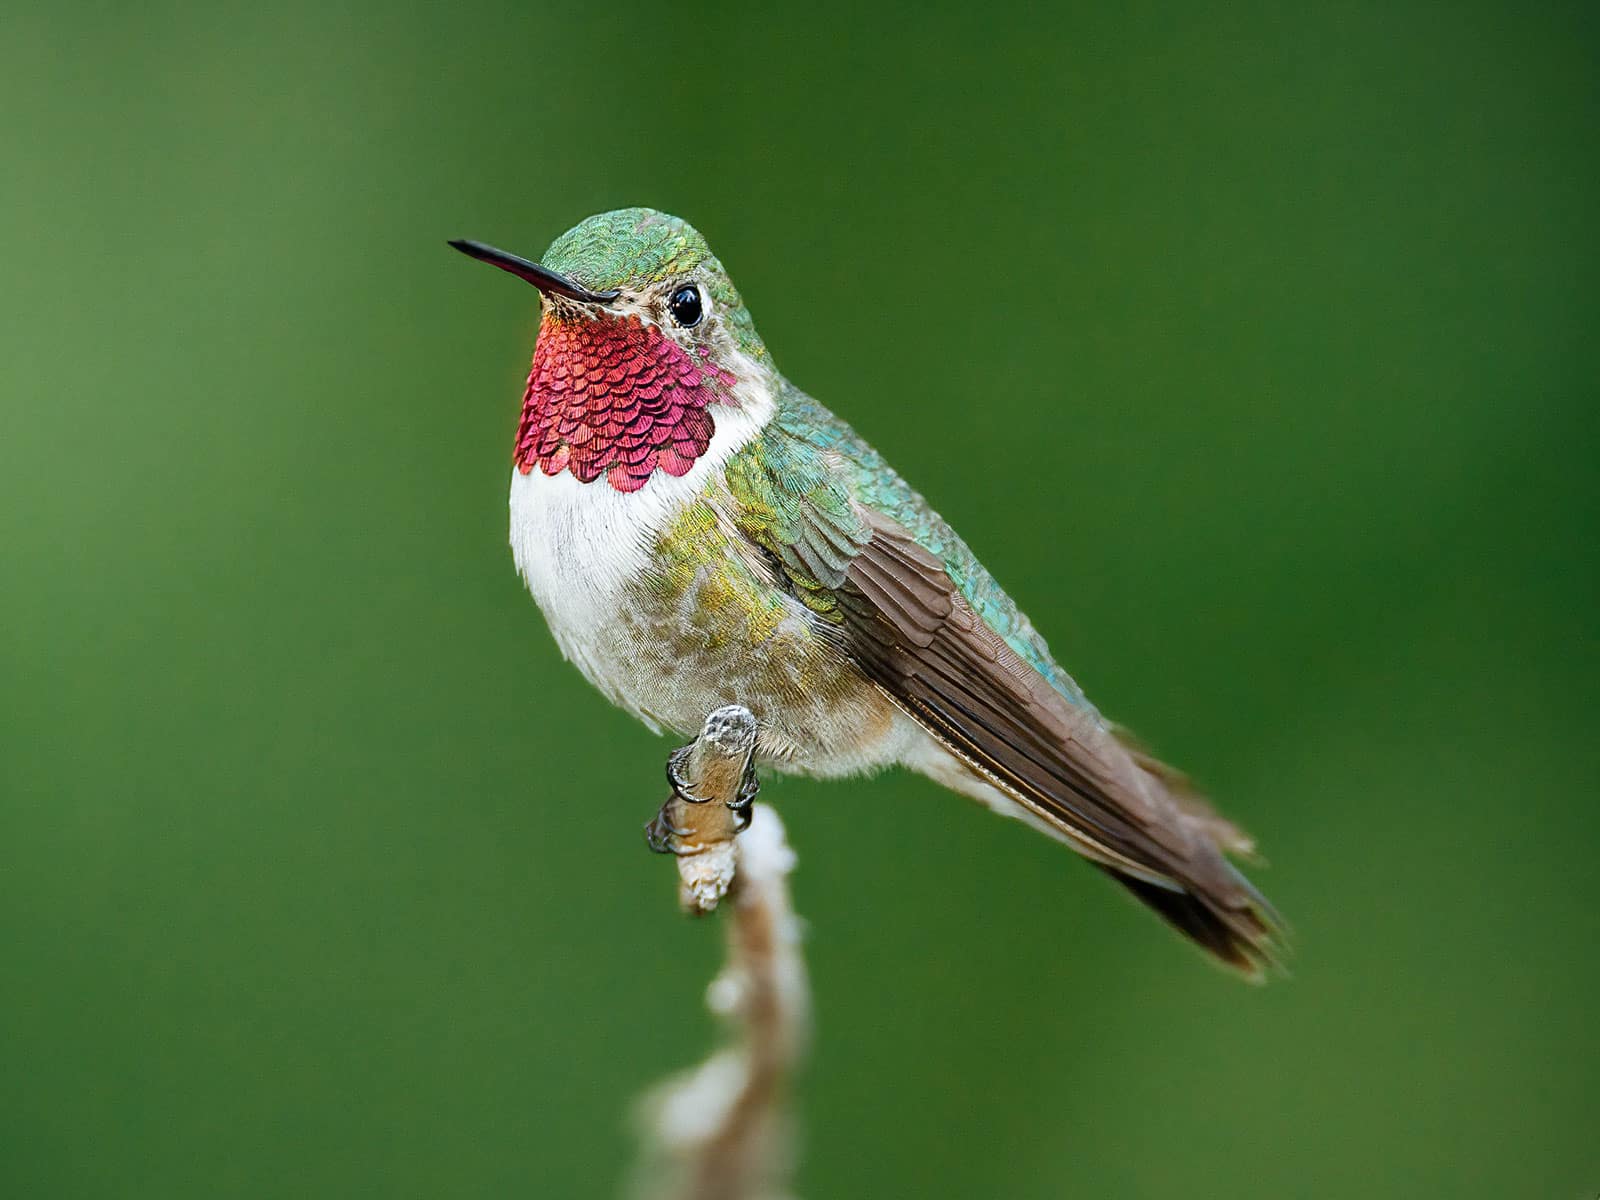 Broad-tailed hummingbird on a tree branch